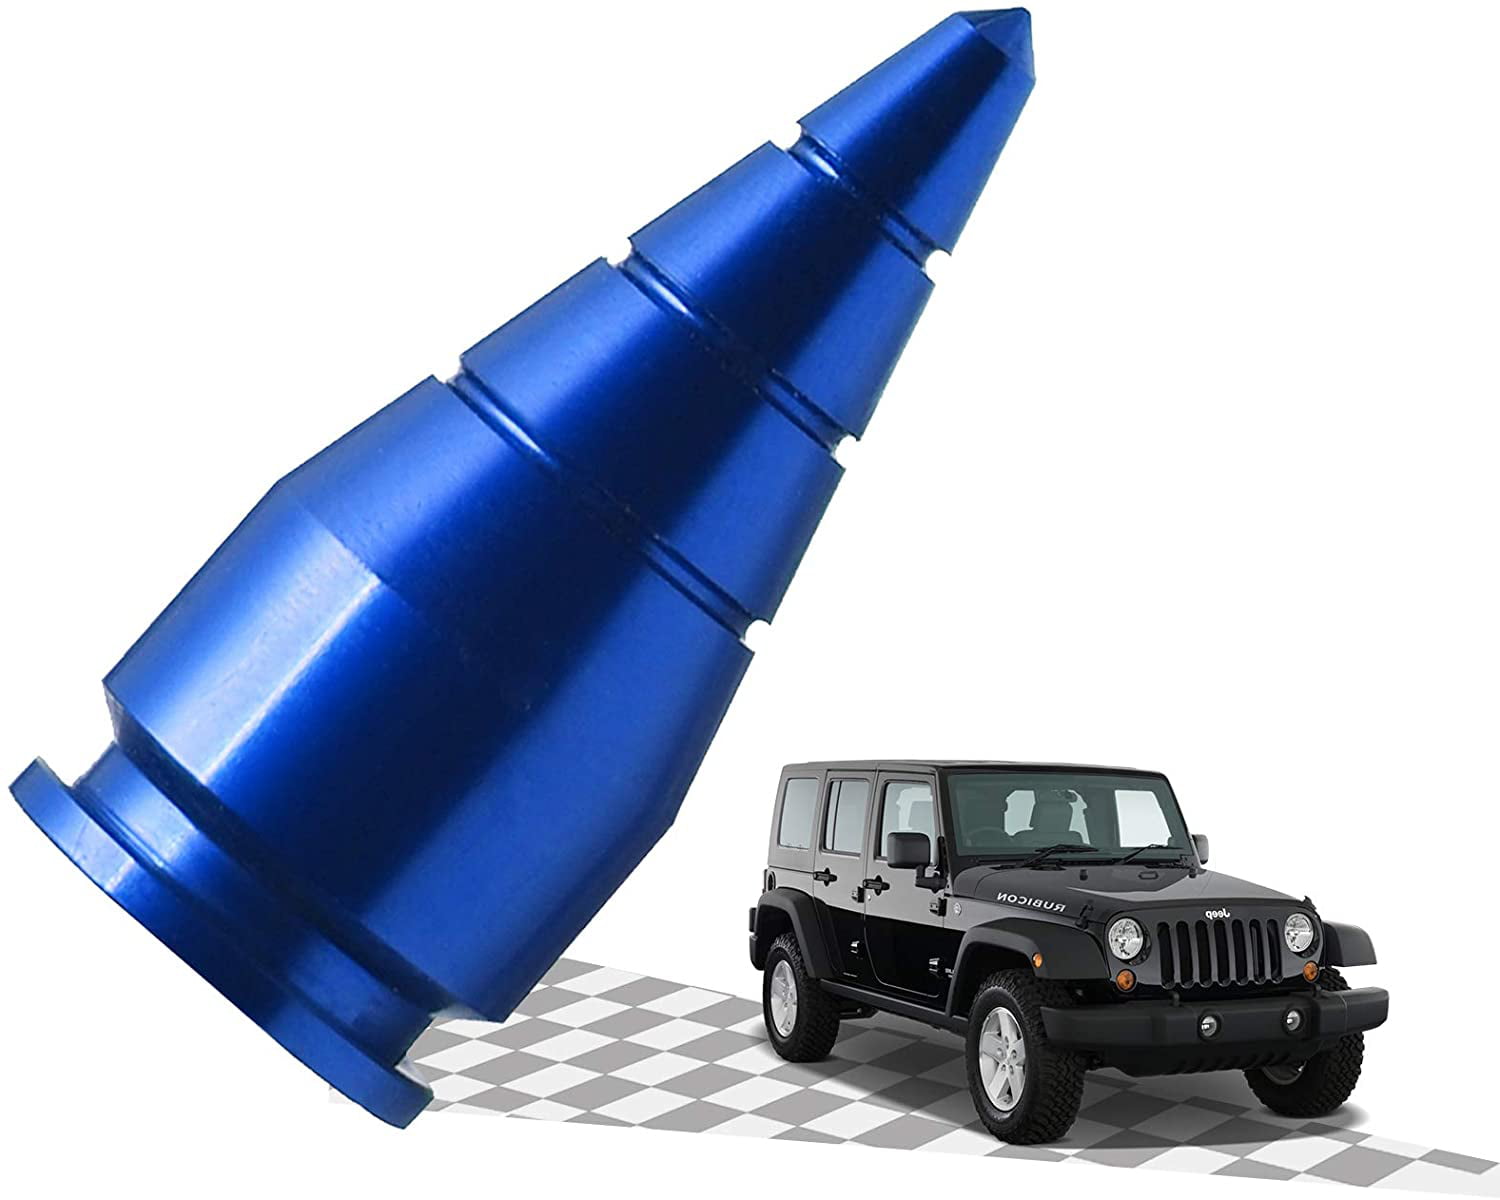 Stealth Black DROGO 1.5" Tougher Replacement Antenna for Jeep Patriot 2007-2017